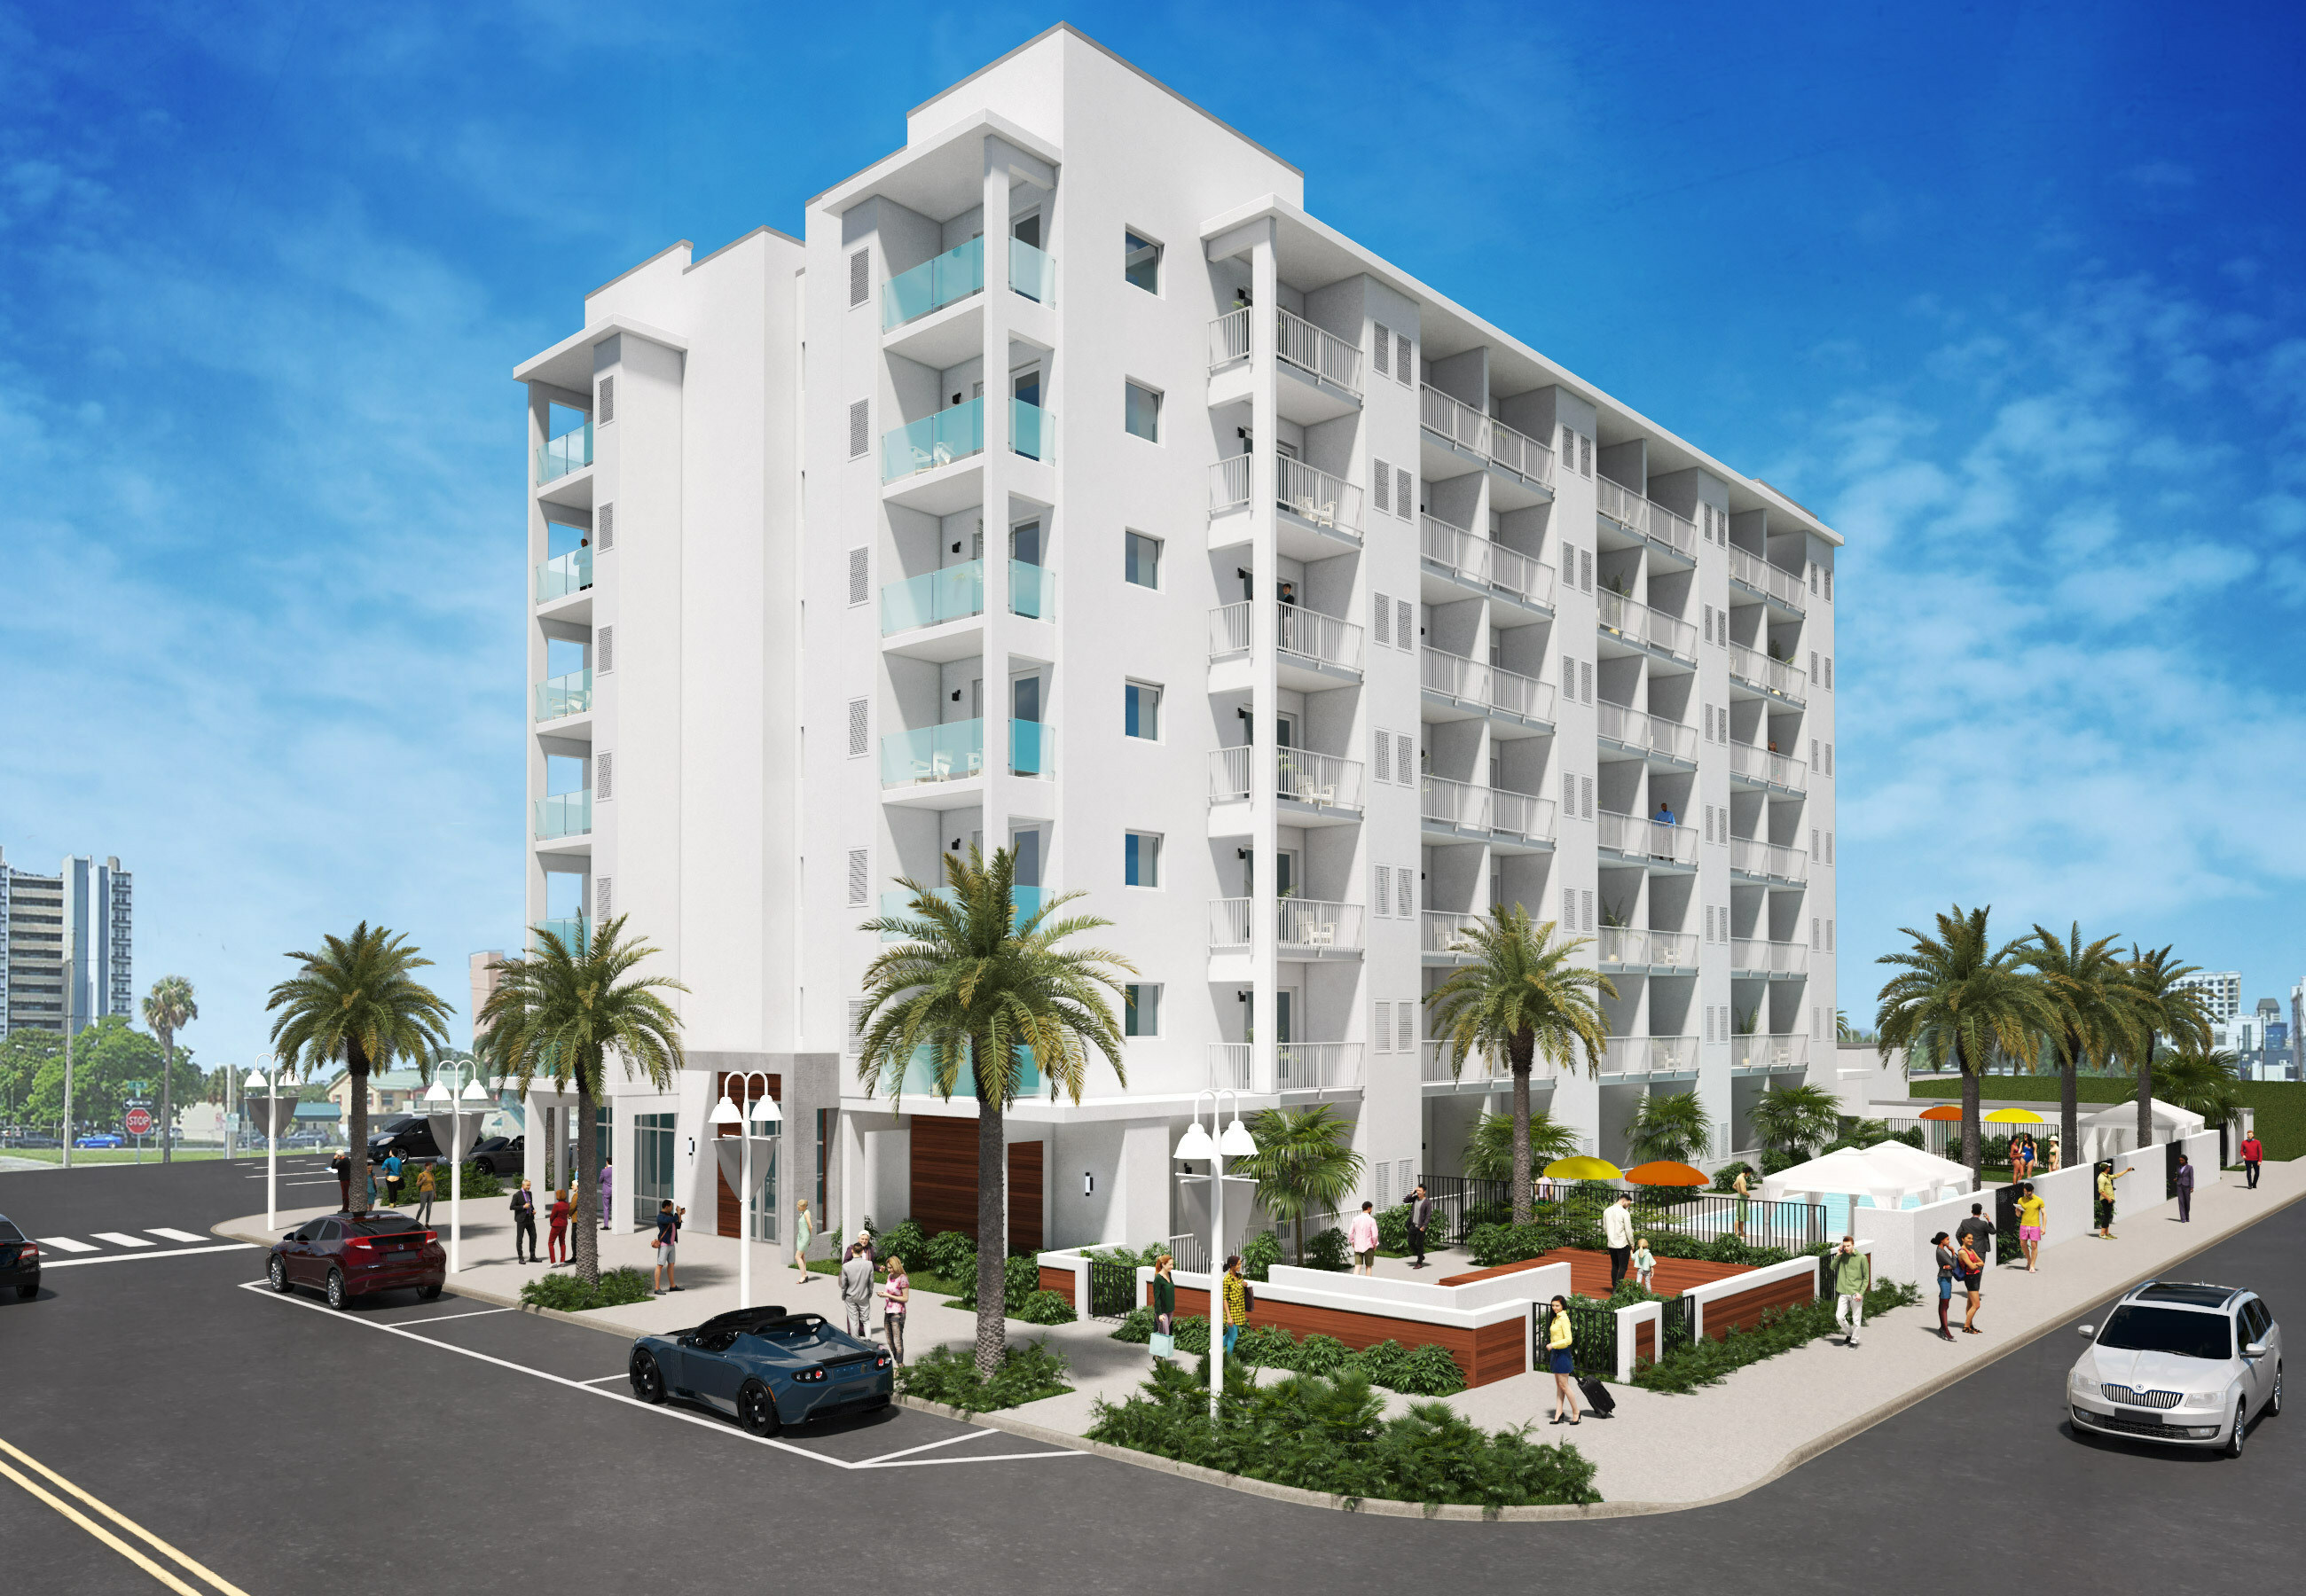 Tech-First Hospitality Brand Mint House to Launch 100 Apartment-Style Units in Thriving Edge District of St. Petersburg, Florida 